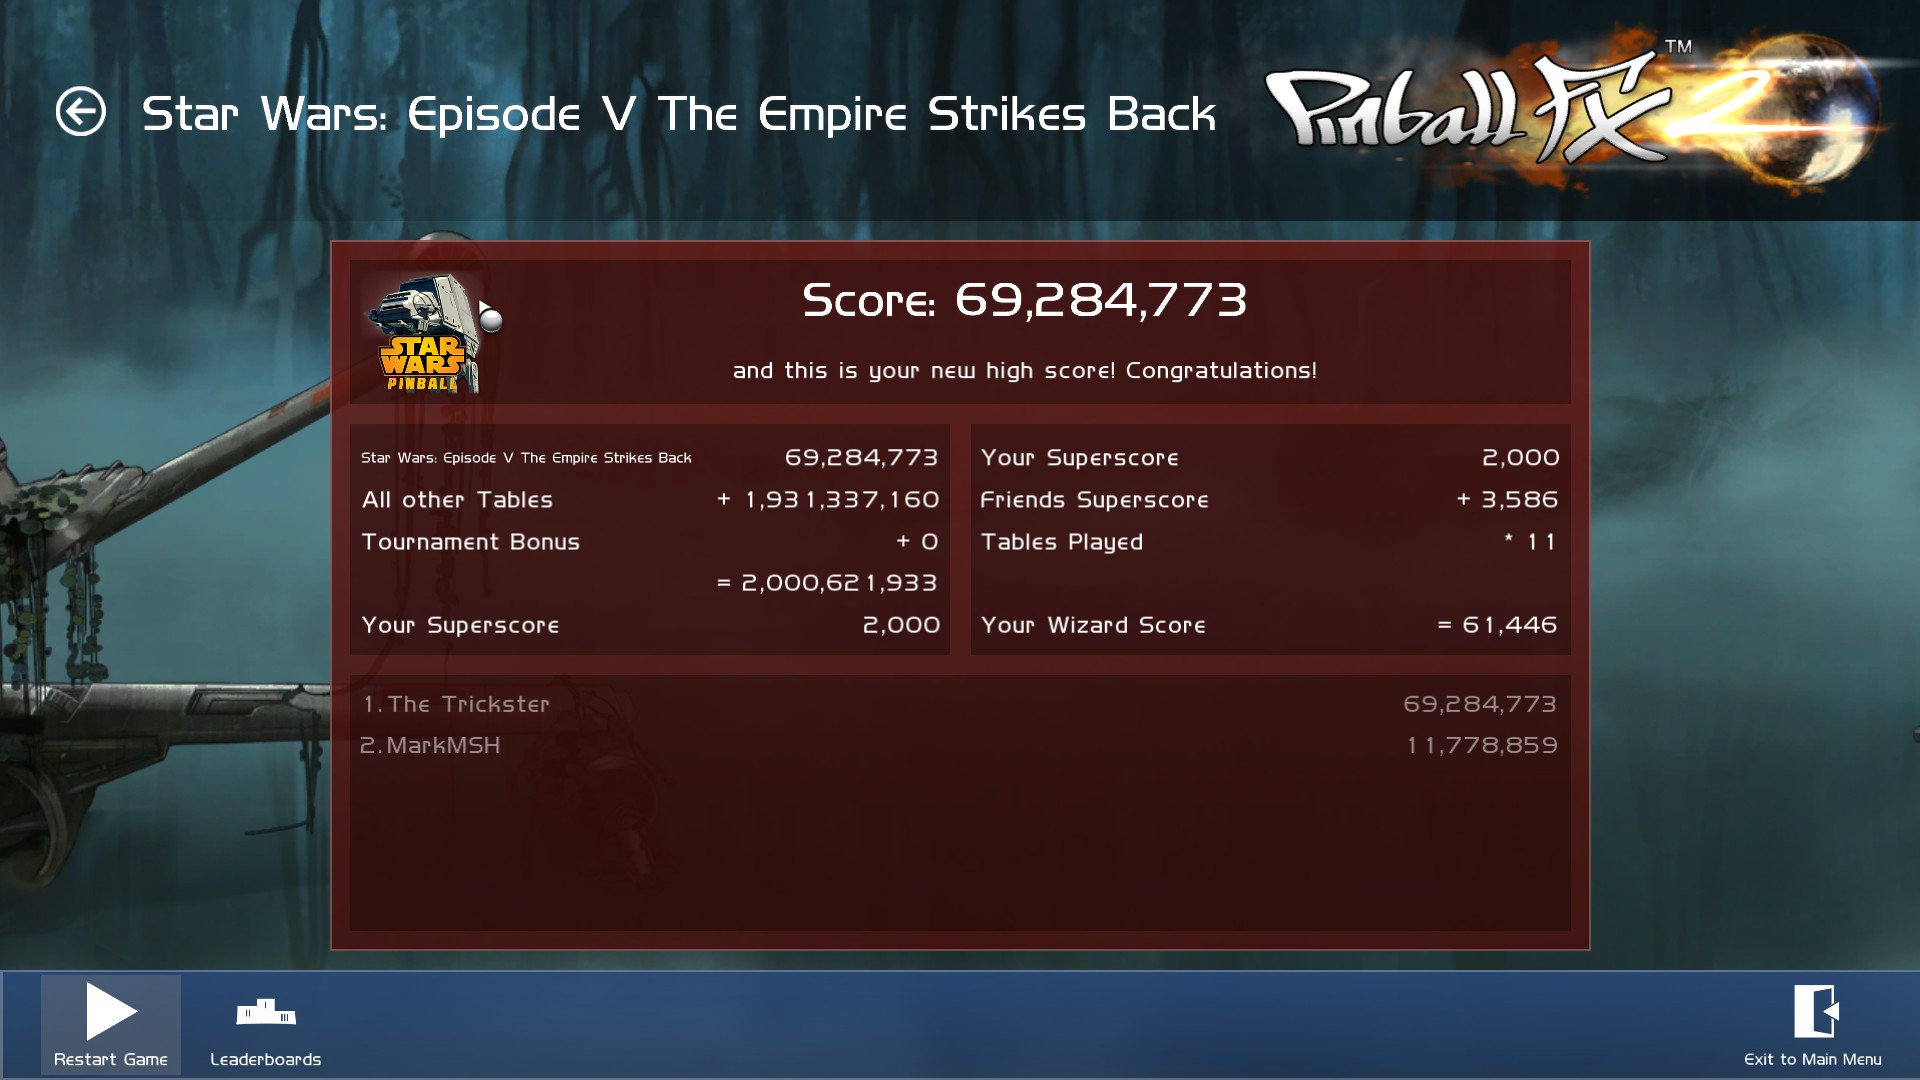 TheTrickster: Pinball FX 2: Star Wars: Episode V: The Empire Strikes Back (PC) 69,284,773 points on 2015-12-12 03:00:46